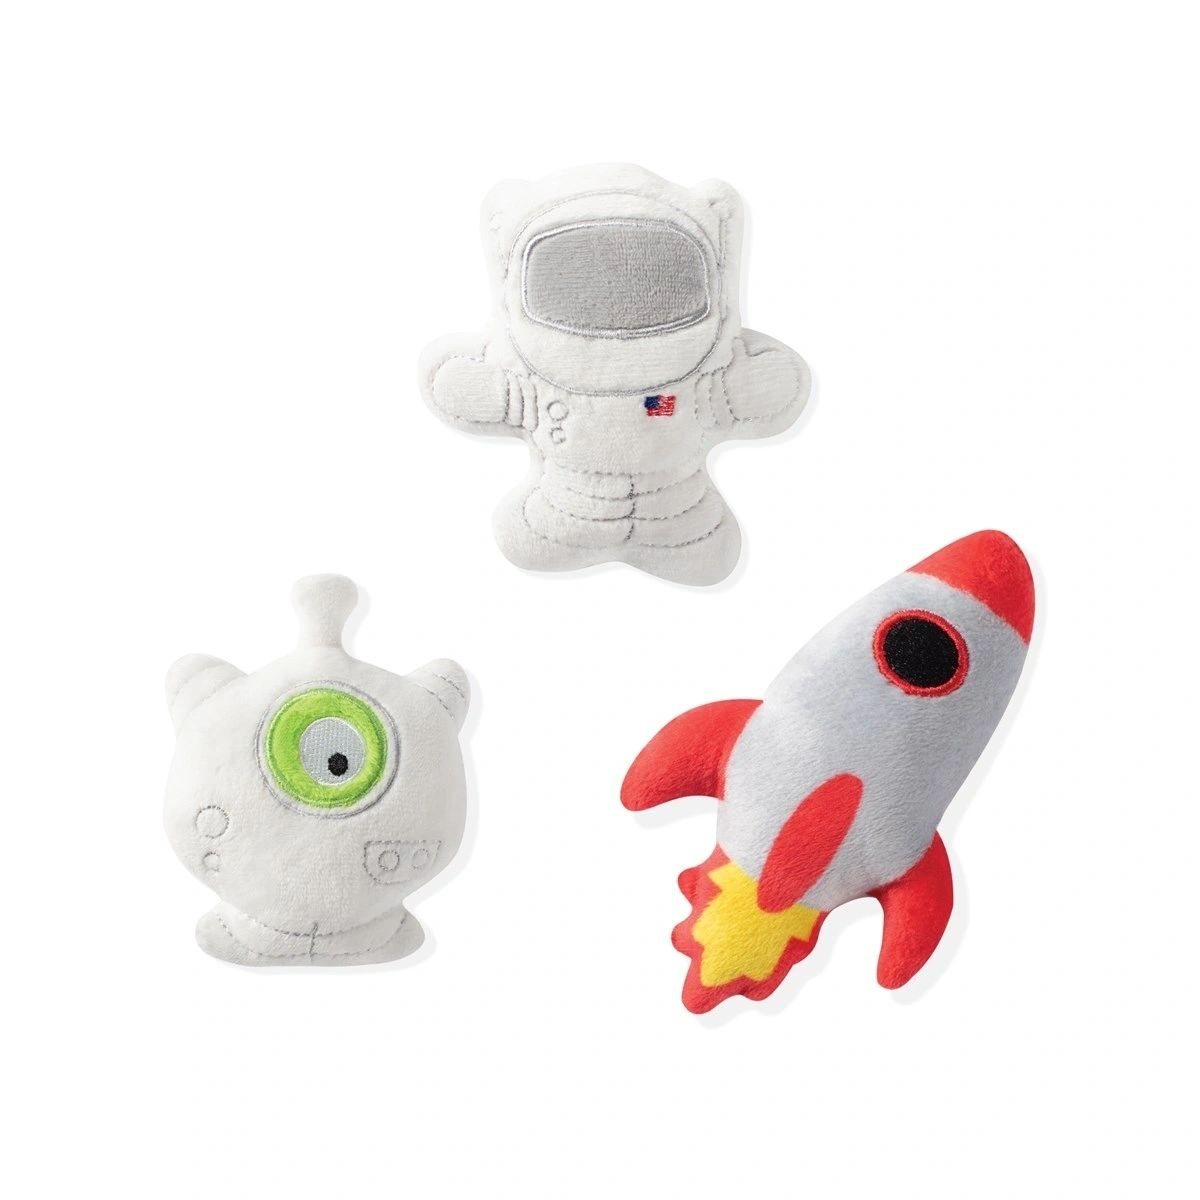 Space 3 pc Dog Toy - Small